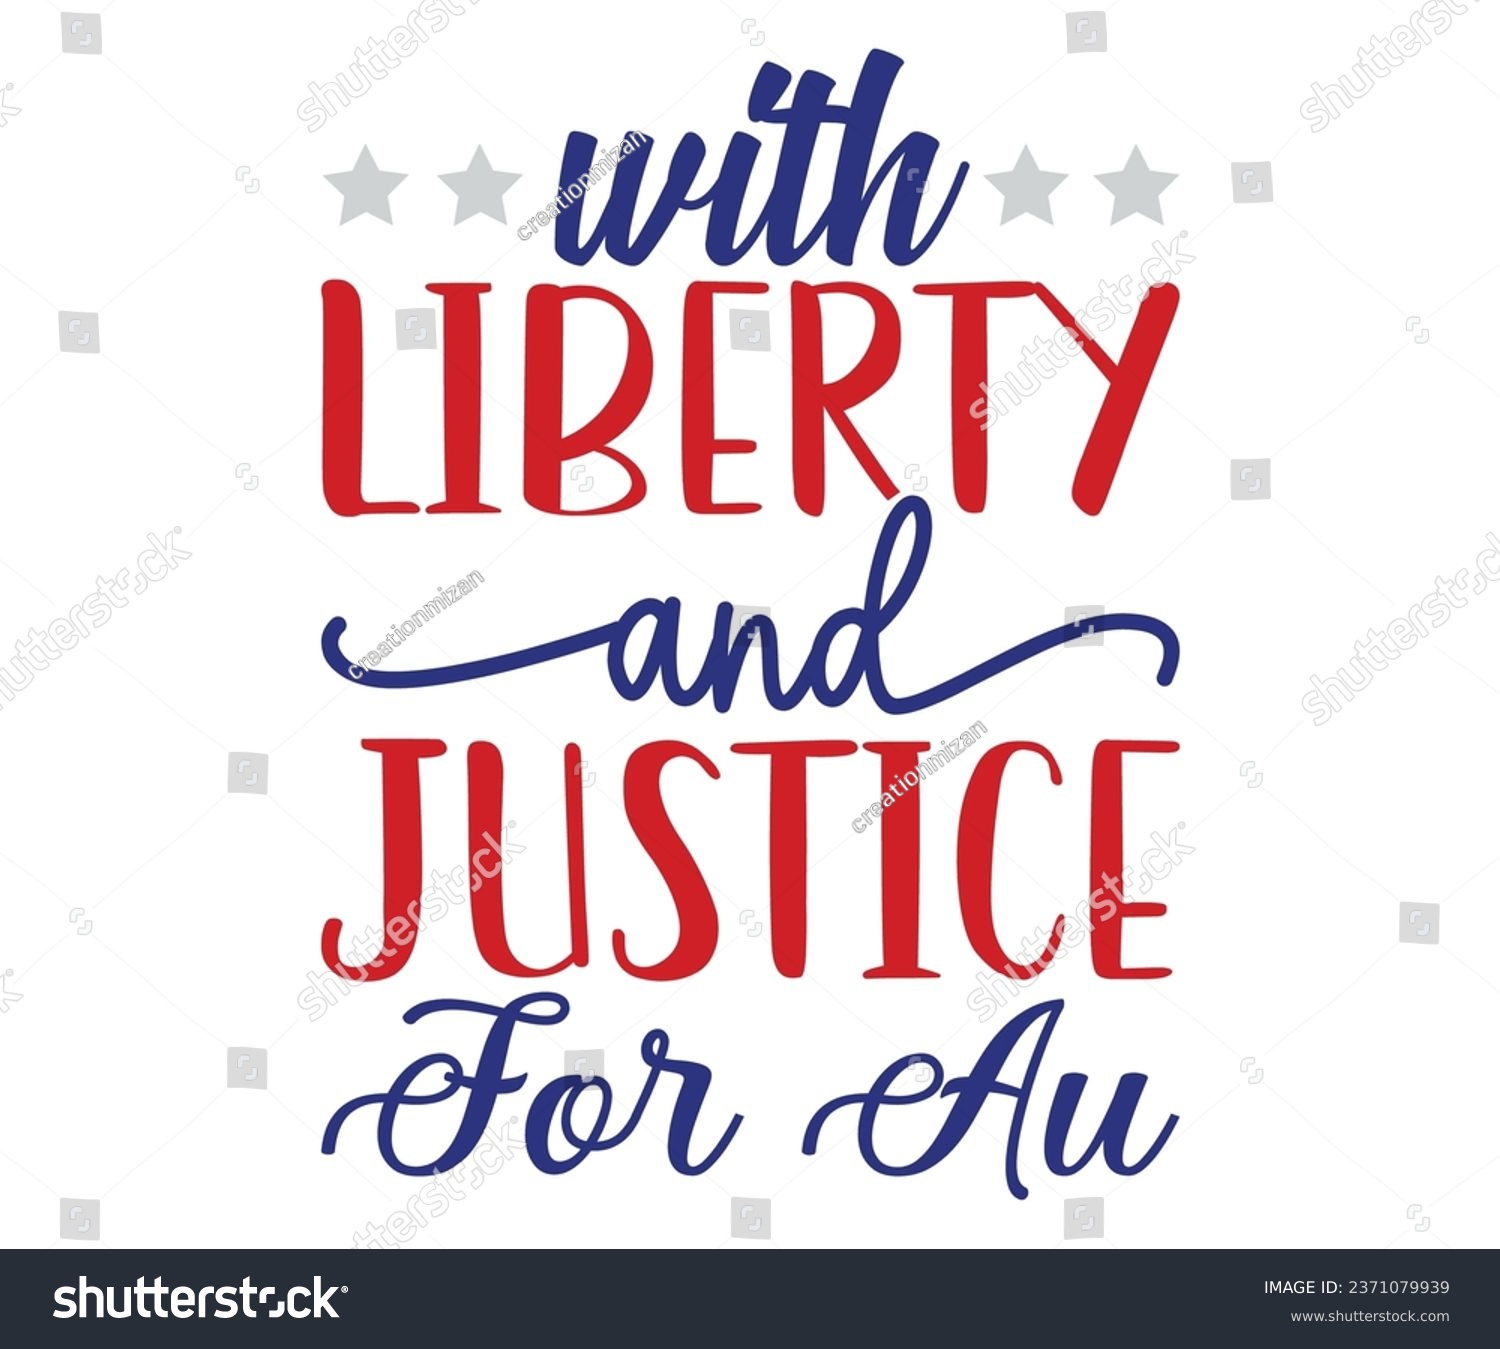 SVG of with liberty and justice for au Svg,Veteran Clipart,Veteran Cutfile,Veteran Dad svg,Military svg,Military Dad svg,4th of July Clipart,Military Dad Gift Idea     
 svg